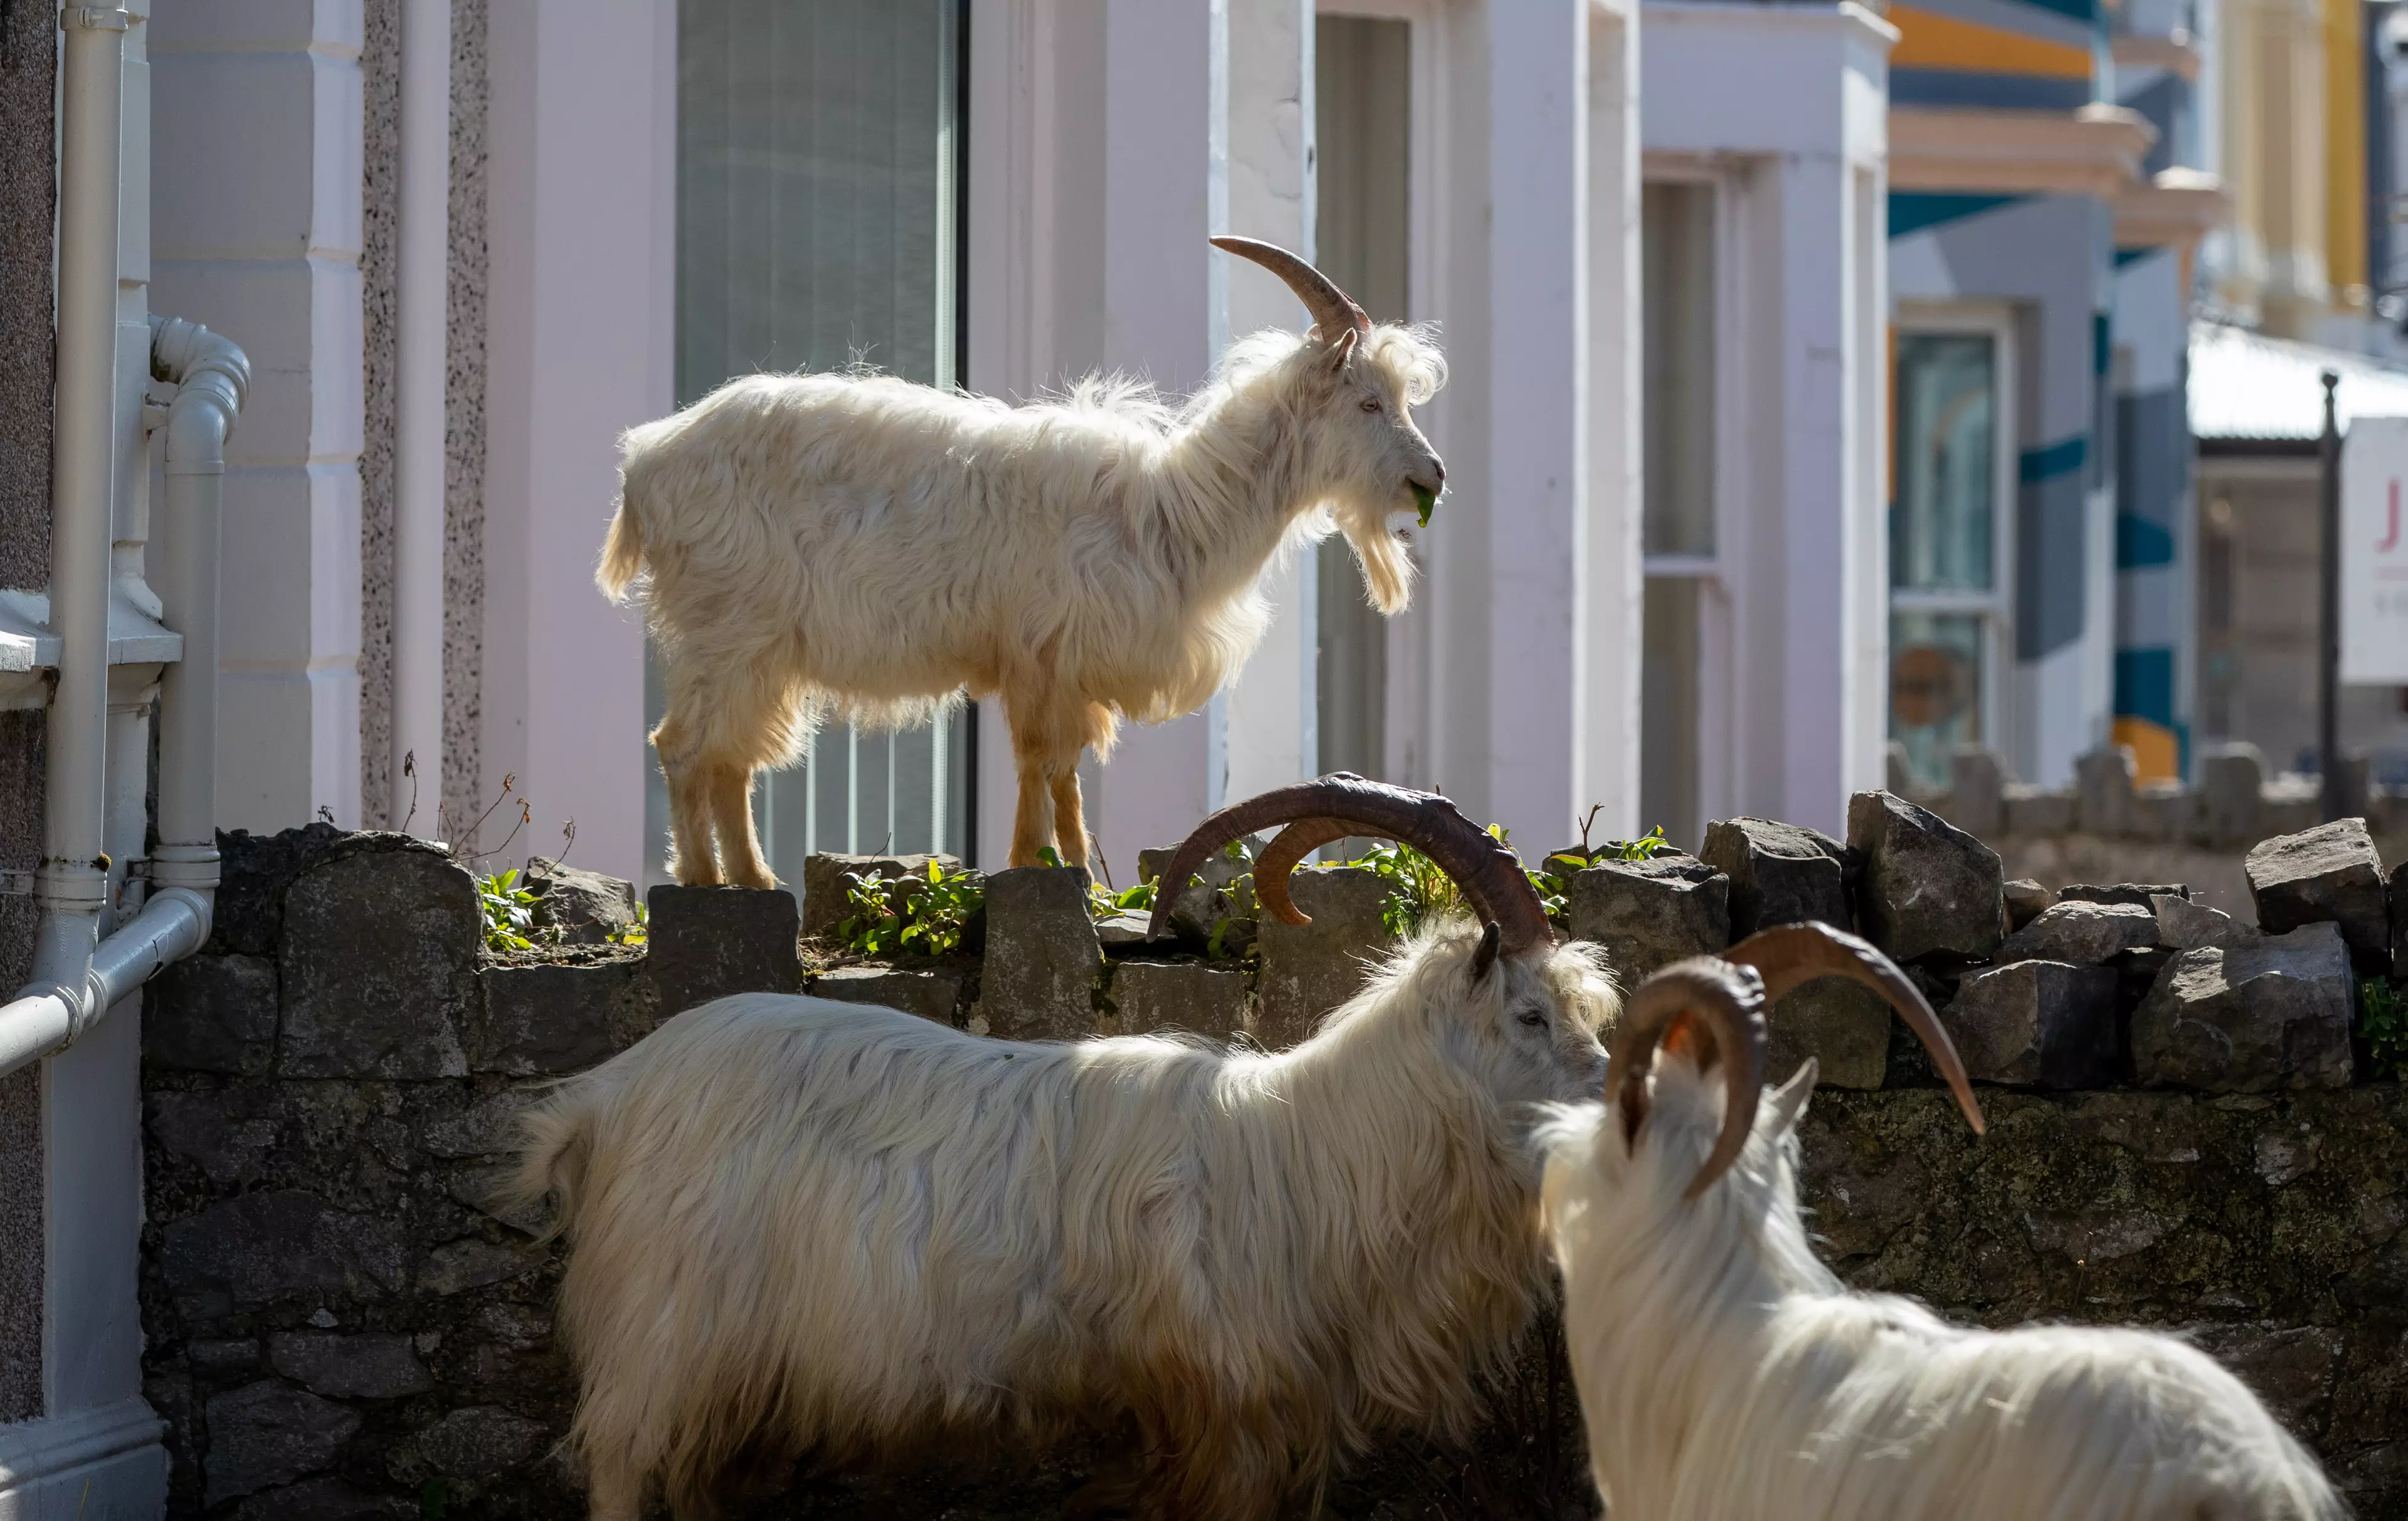 The goats are running riot much to everyone's amusement (